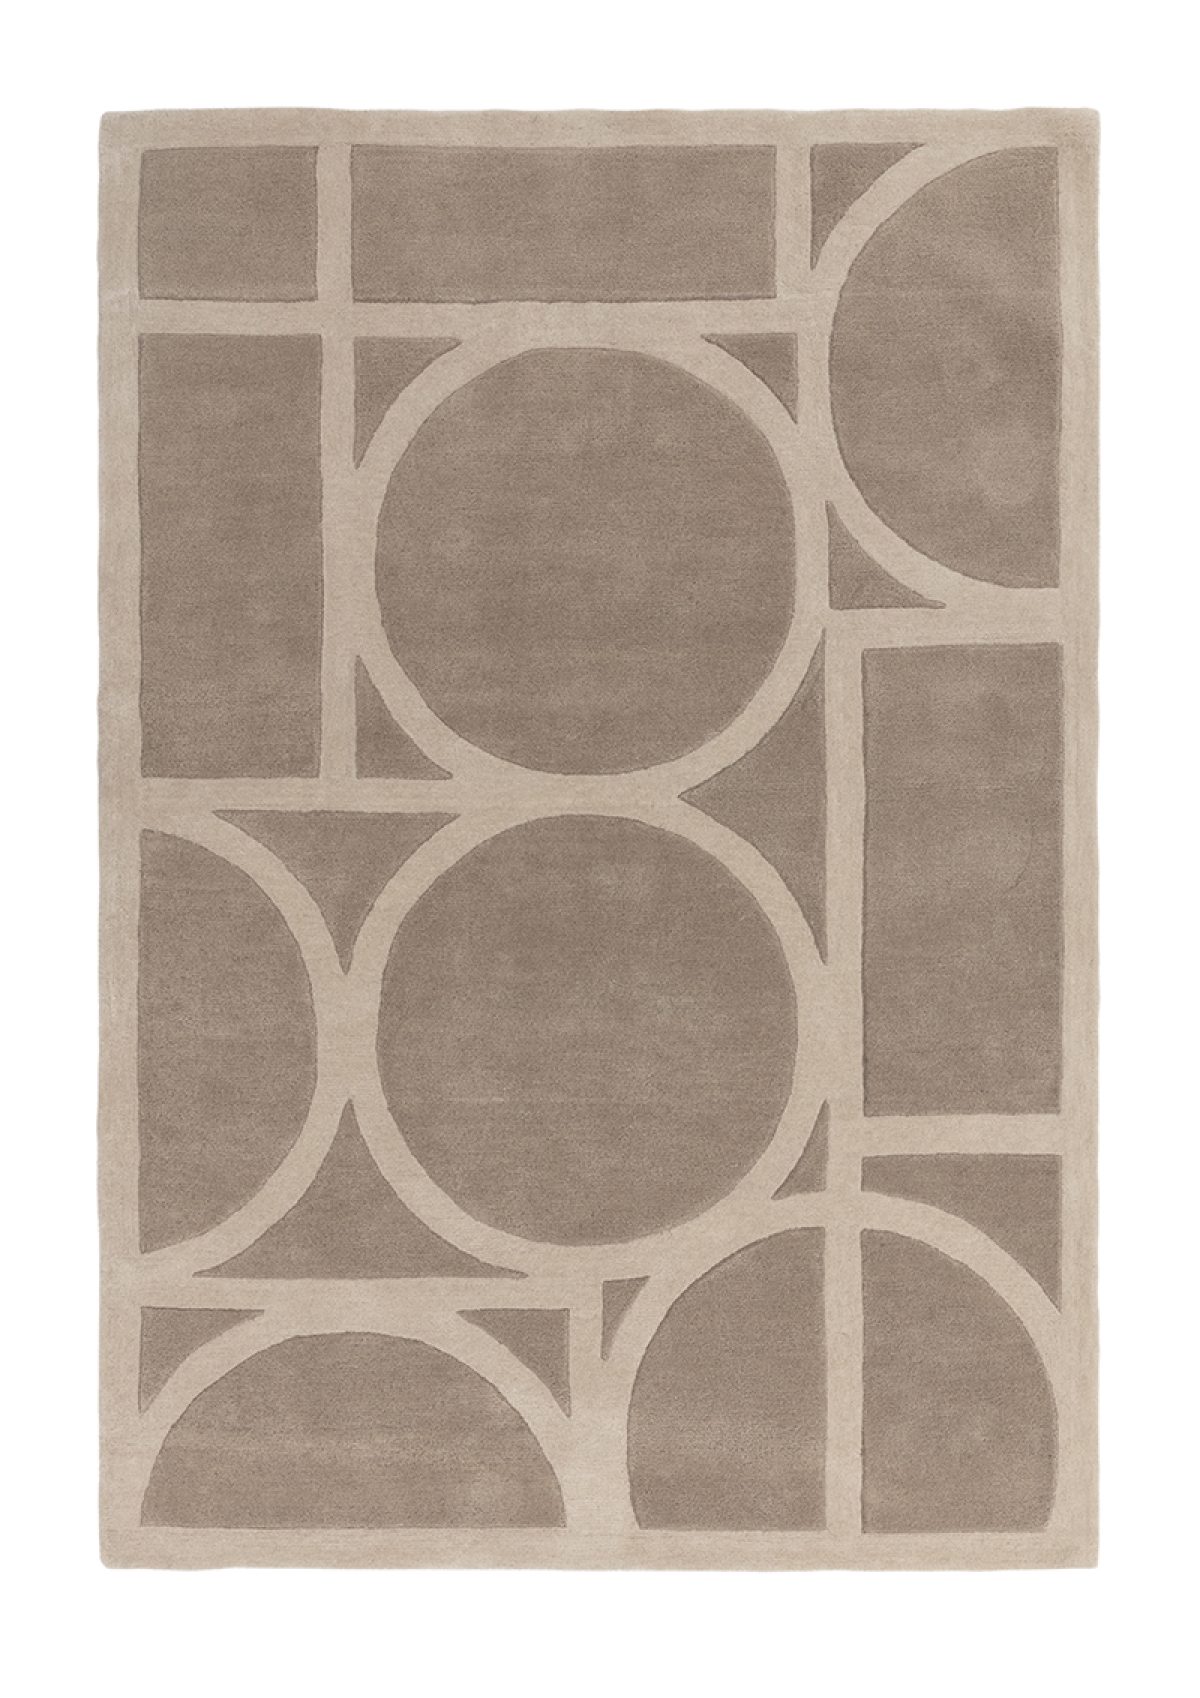 From the living room to the bedroom, this taupe coloured rug compliments any space.